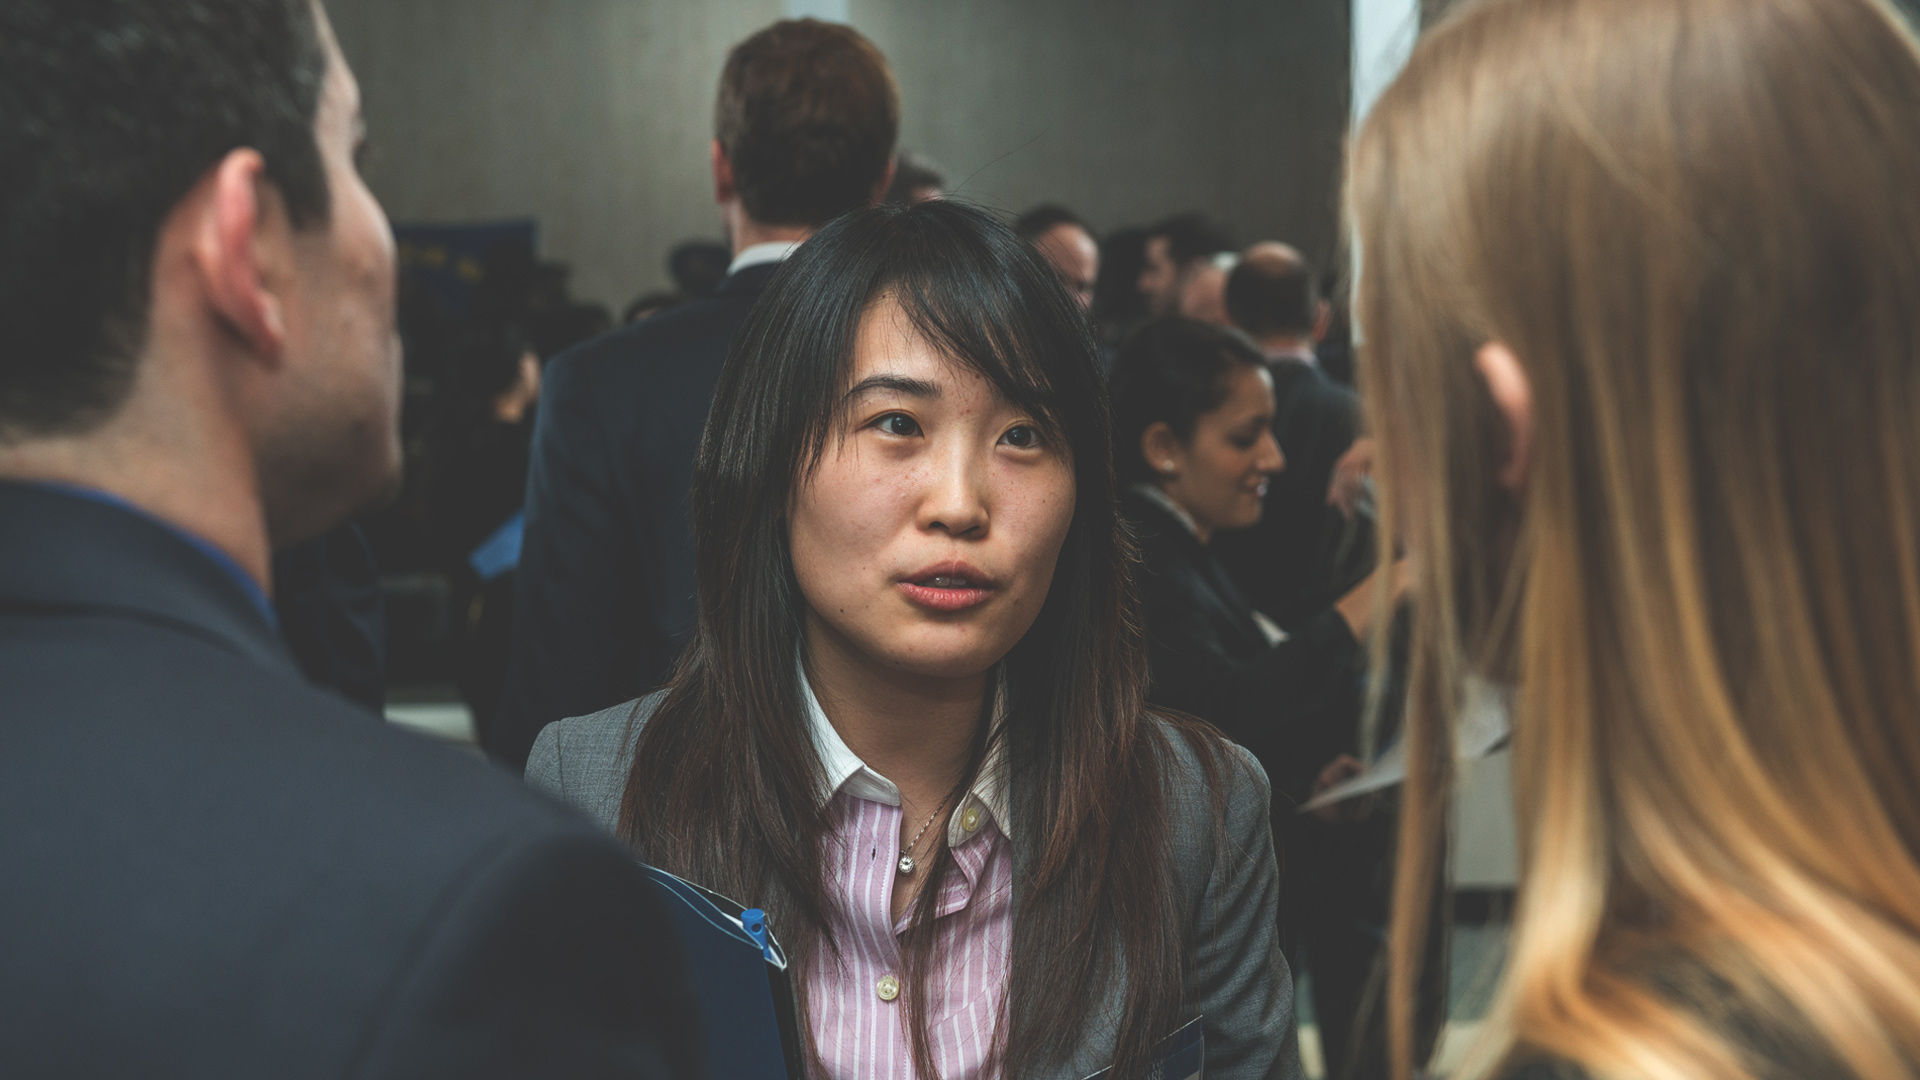 woman soeaking to two people at networking event